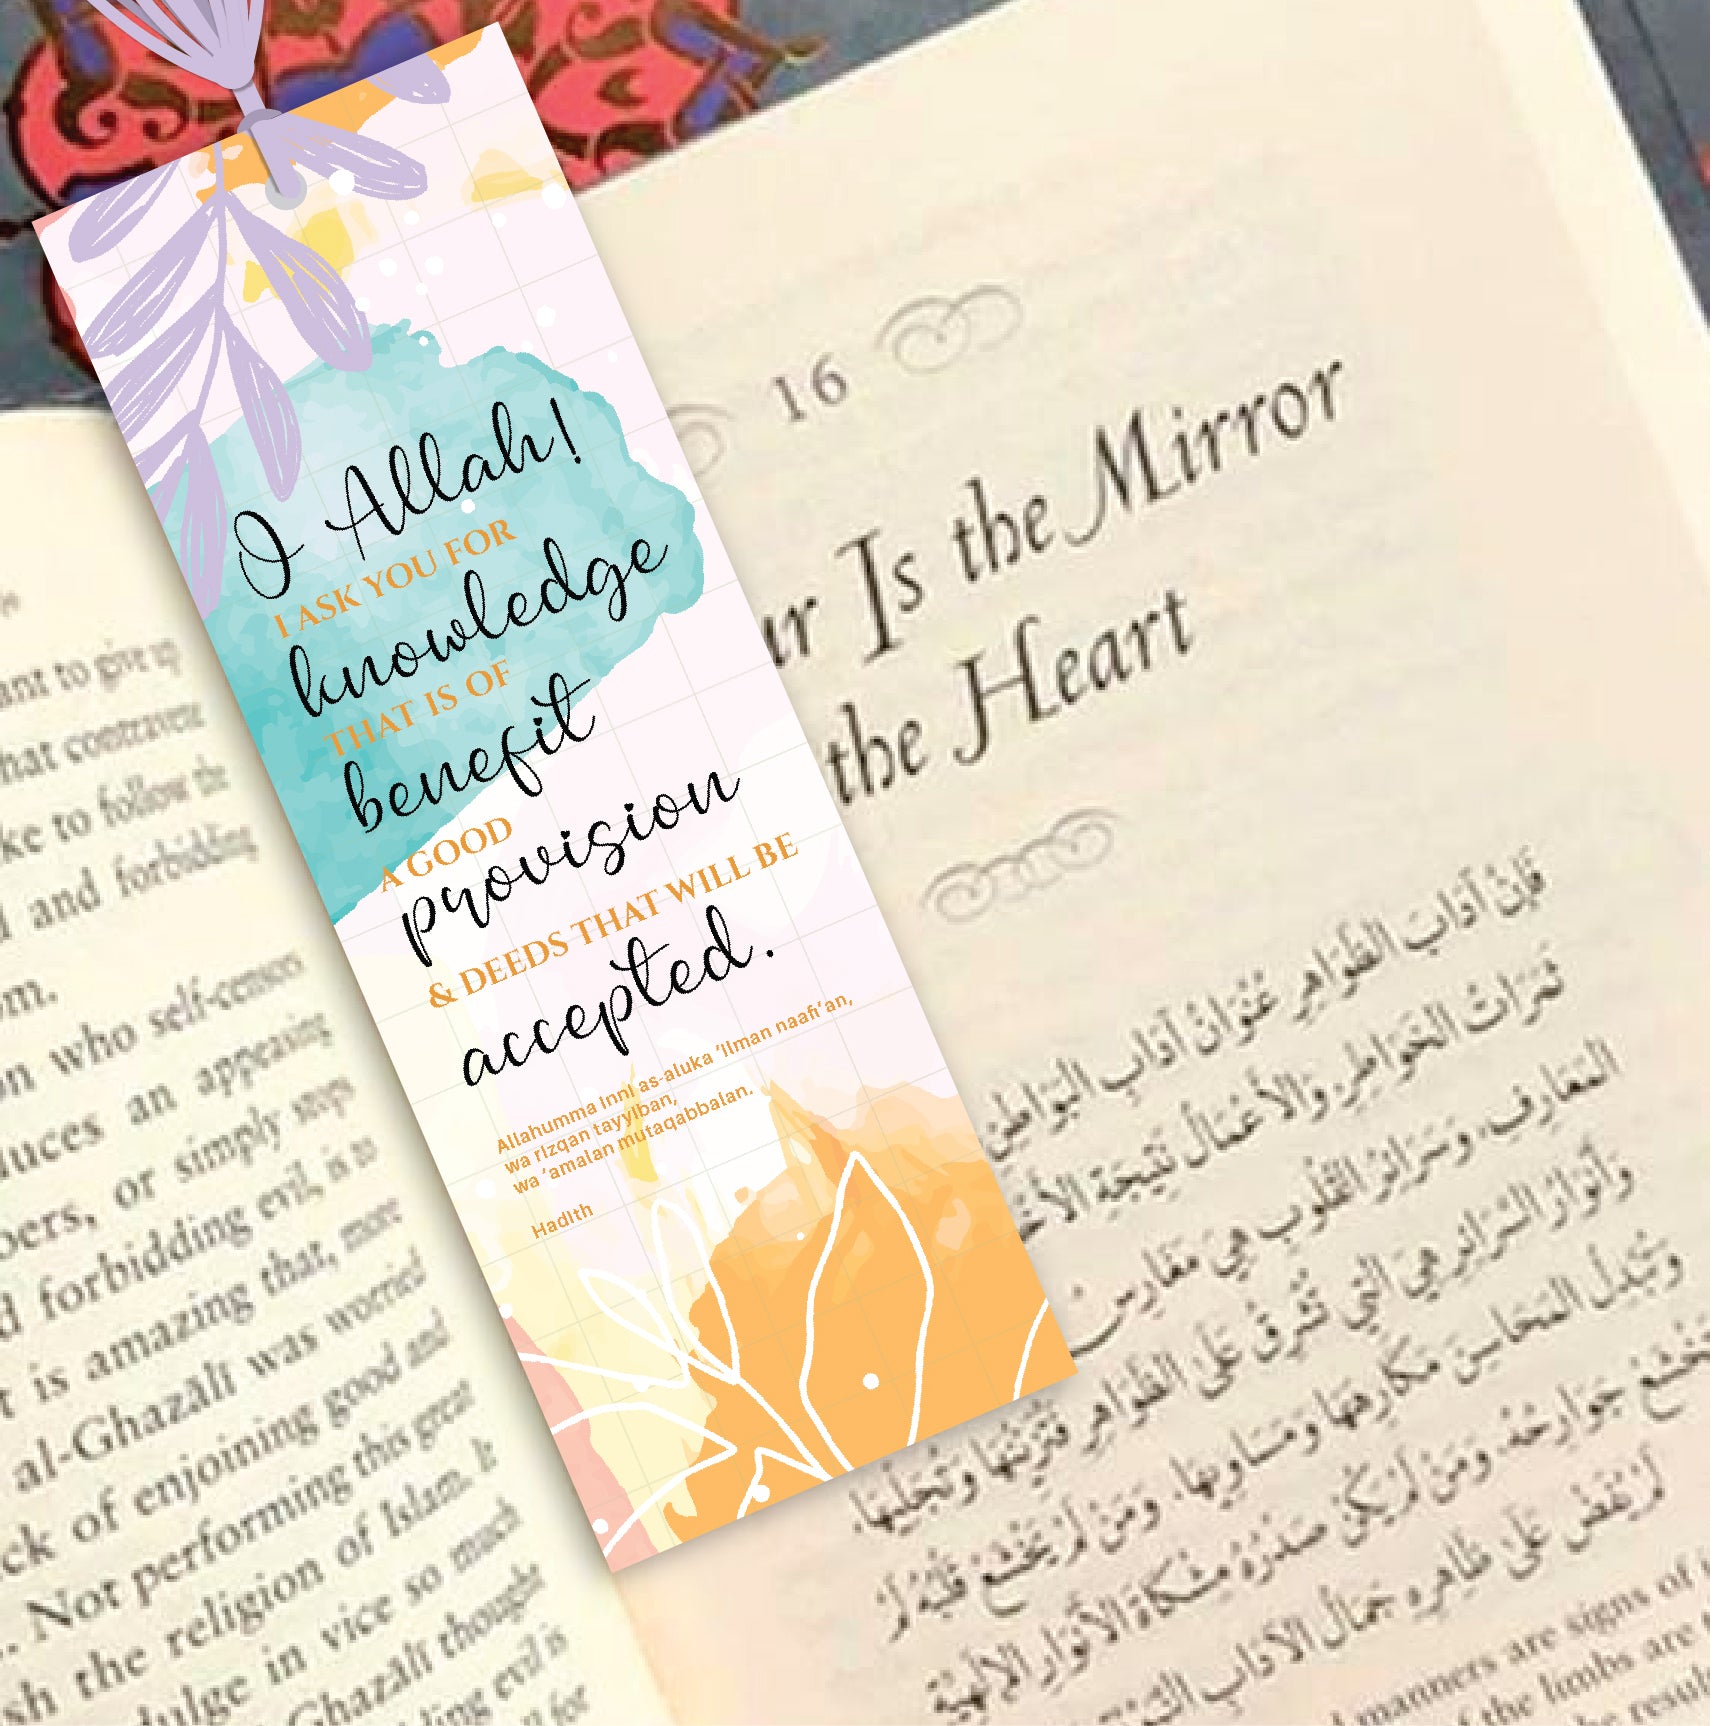 Islamic Bookmark Nothing is Easy